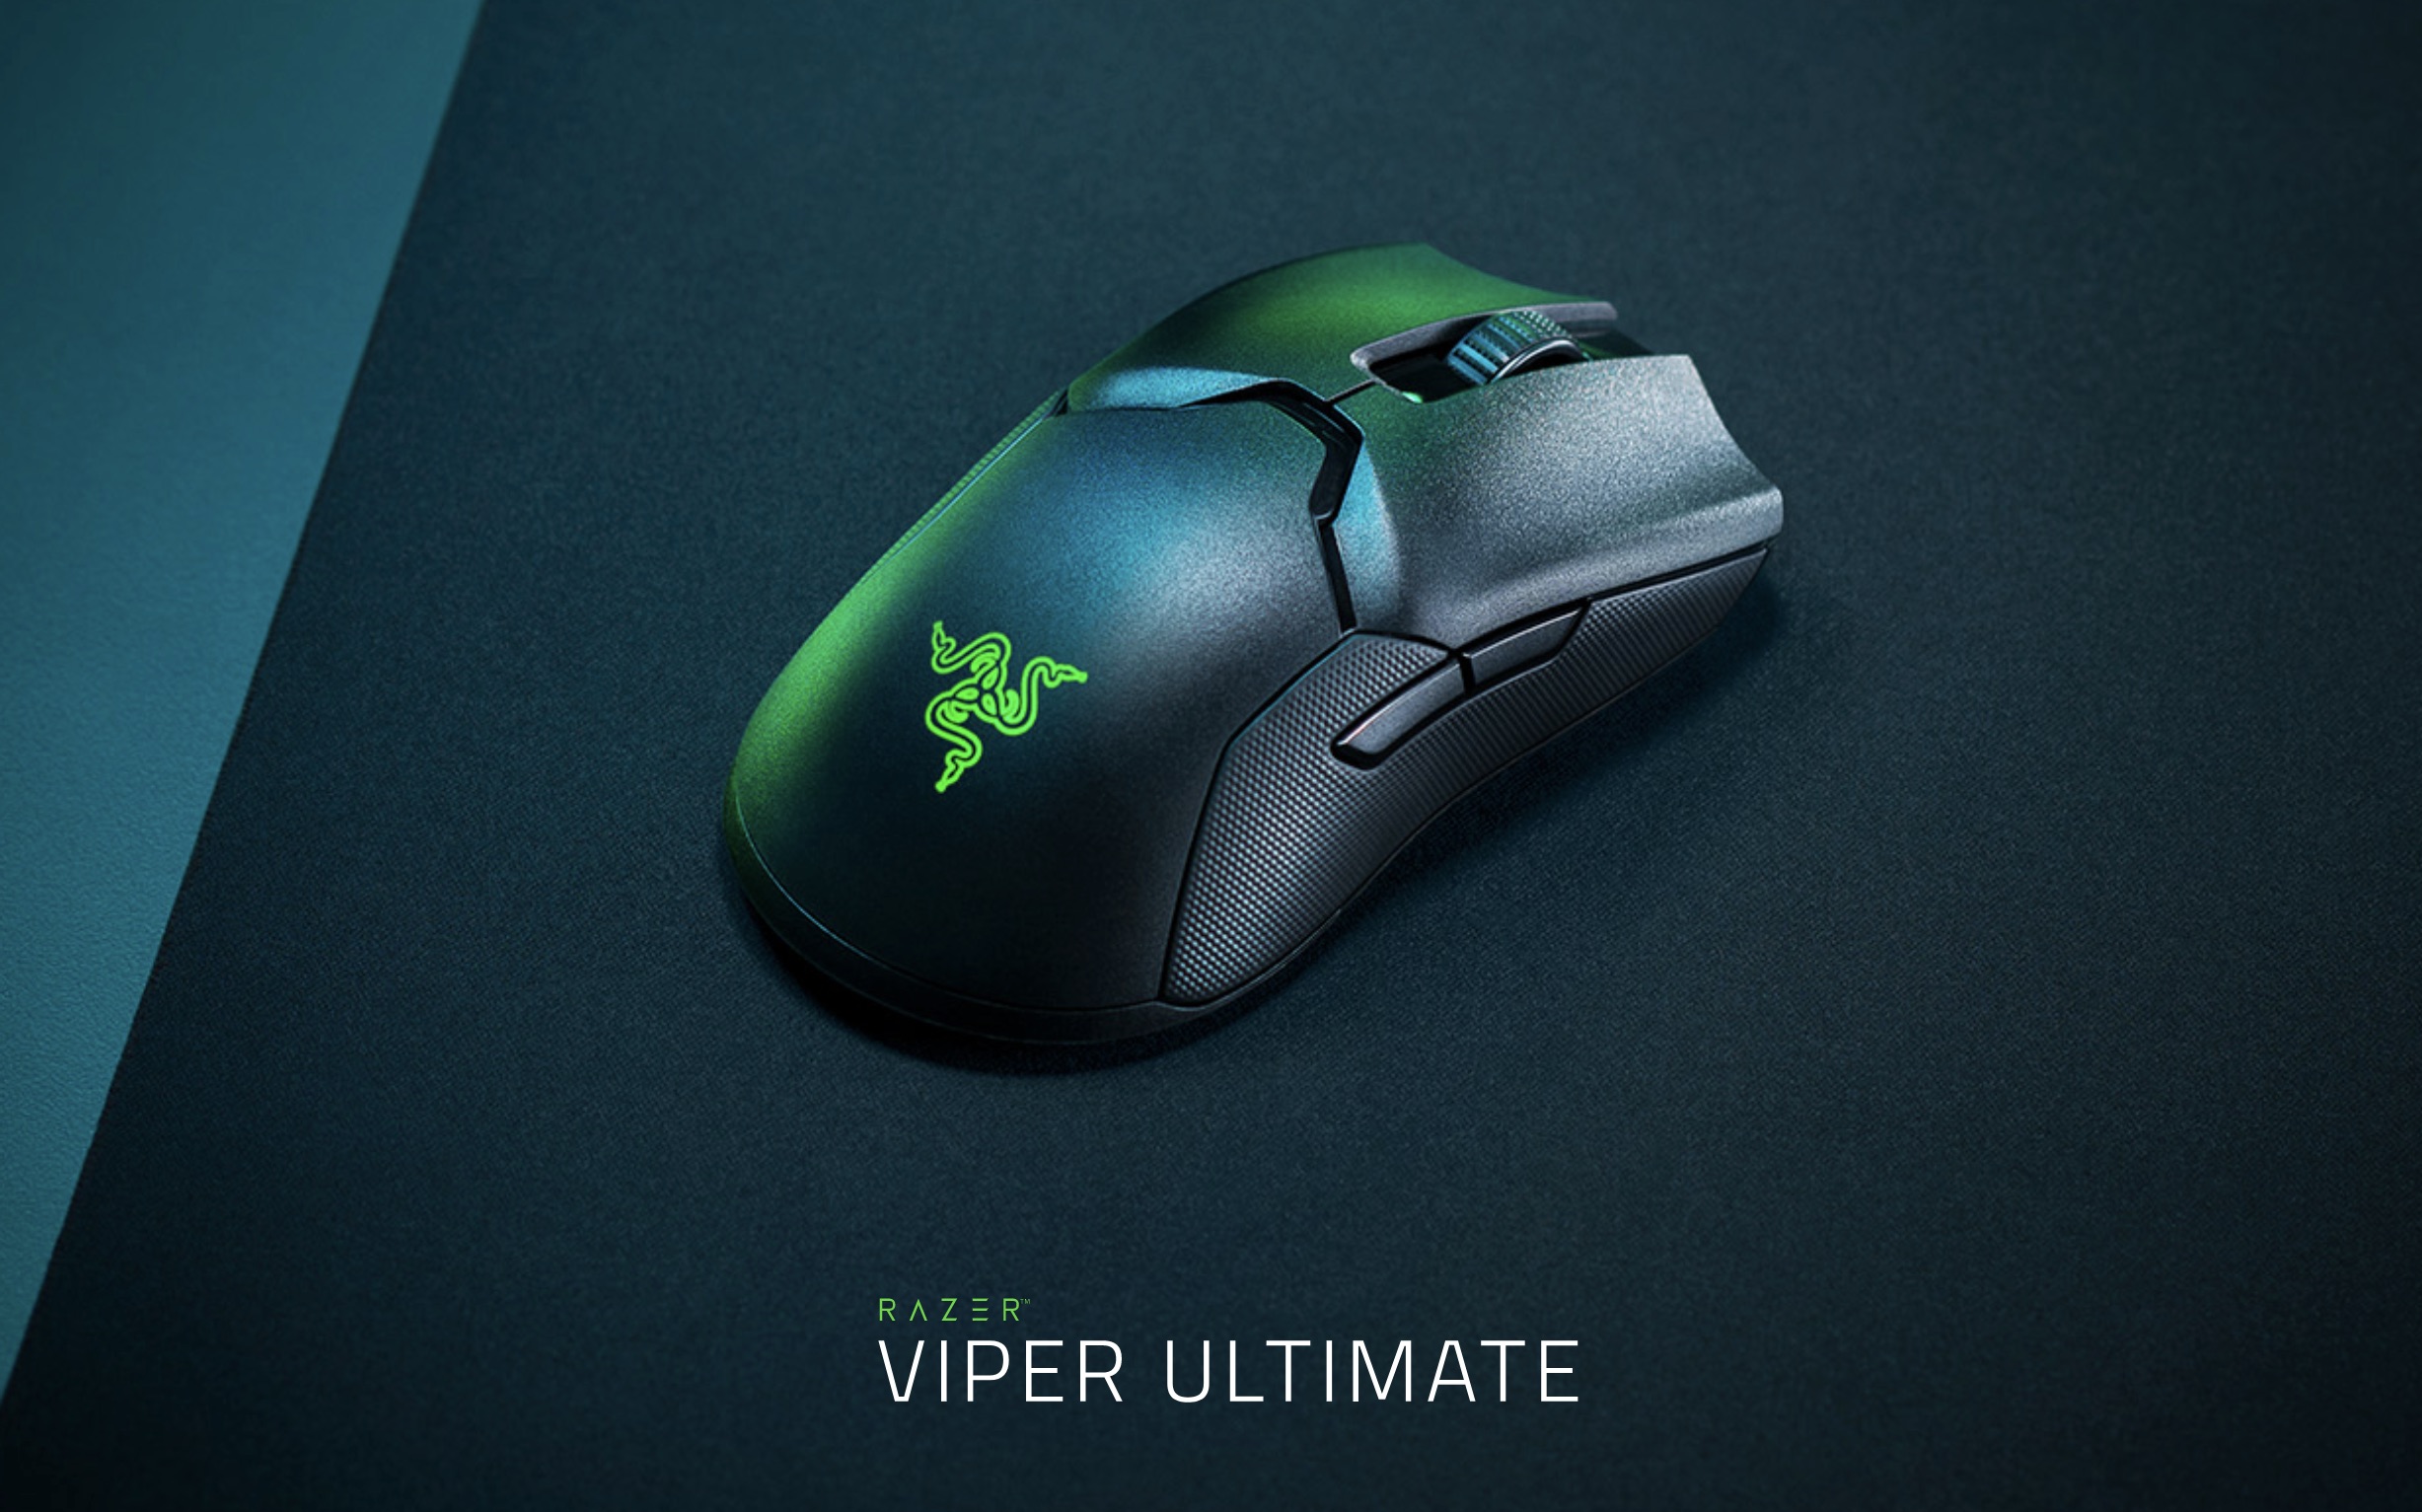 Razer-Viper-Ultimate-With-Charging-Dock-HyperSpeed-Wireless-With-Ambidextrous-Gaming-Mouse-Description-1